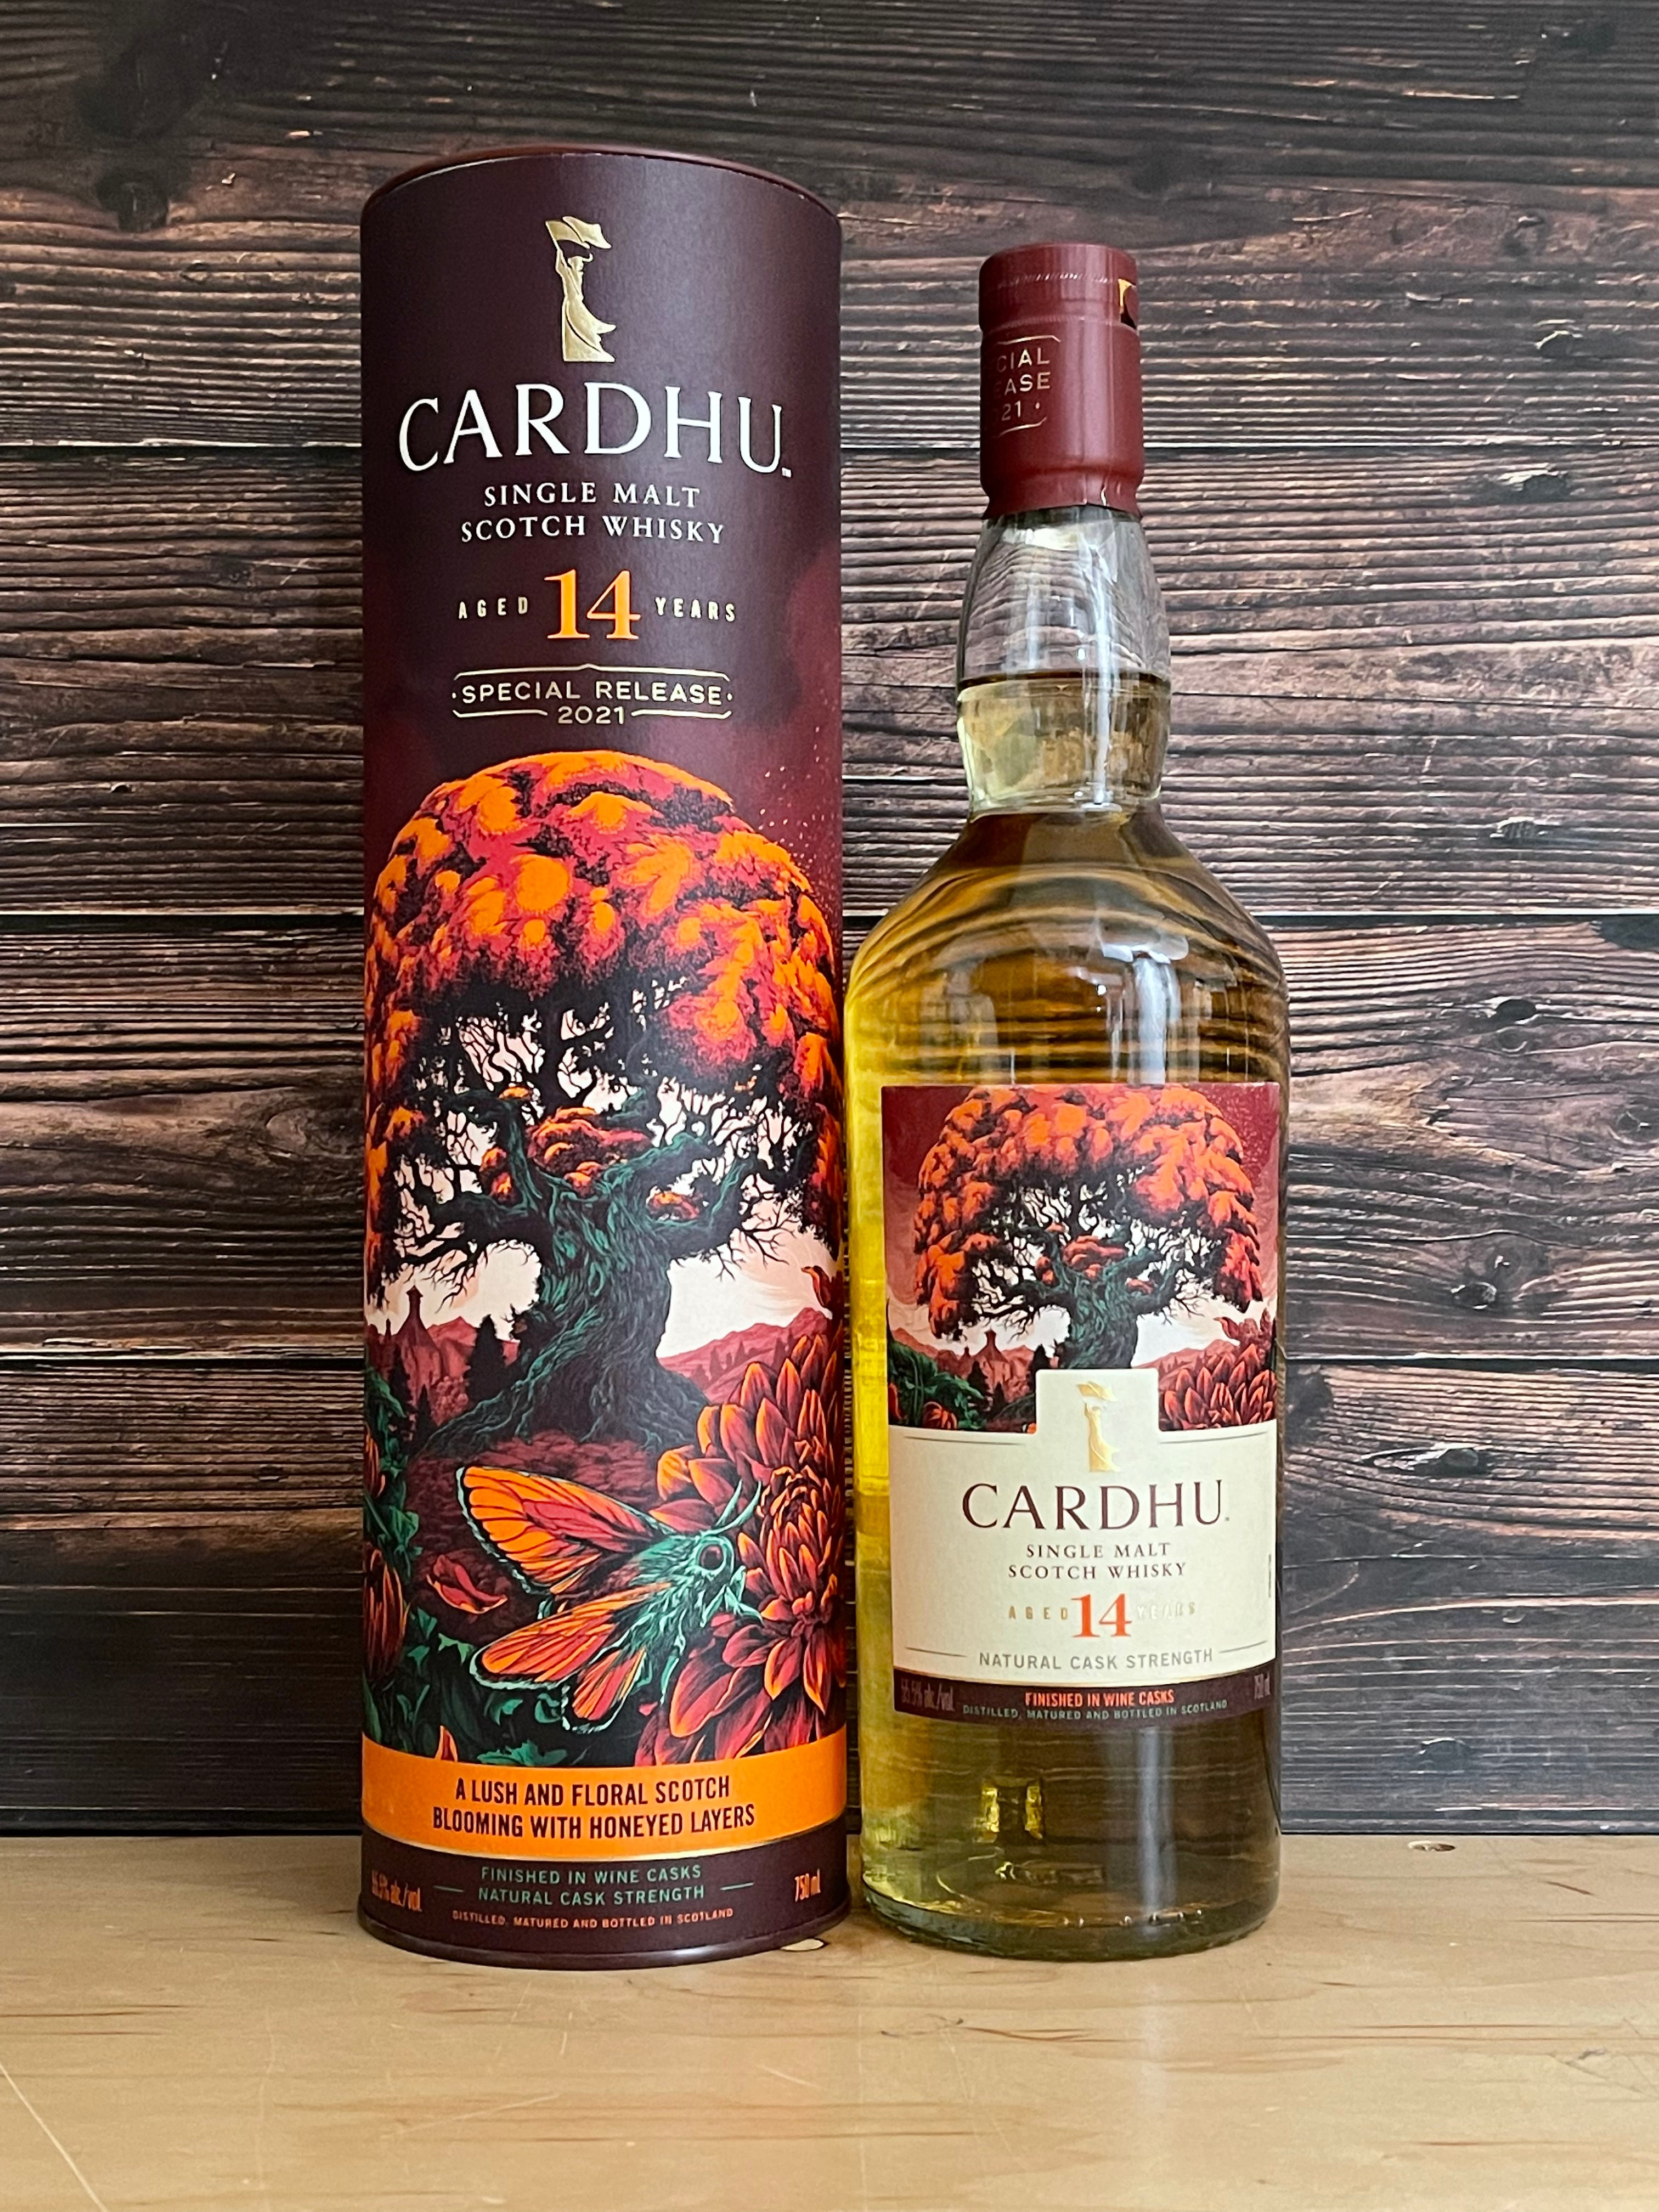 Cardhu Aged 14 Years Single Malt Scotch Whisky (Special Release 2021)